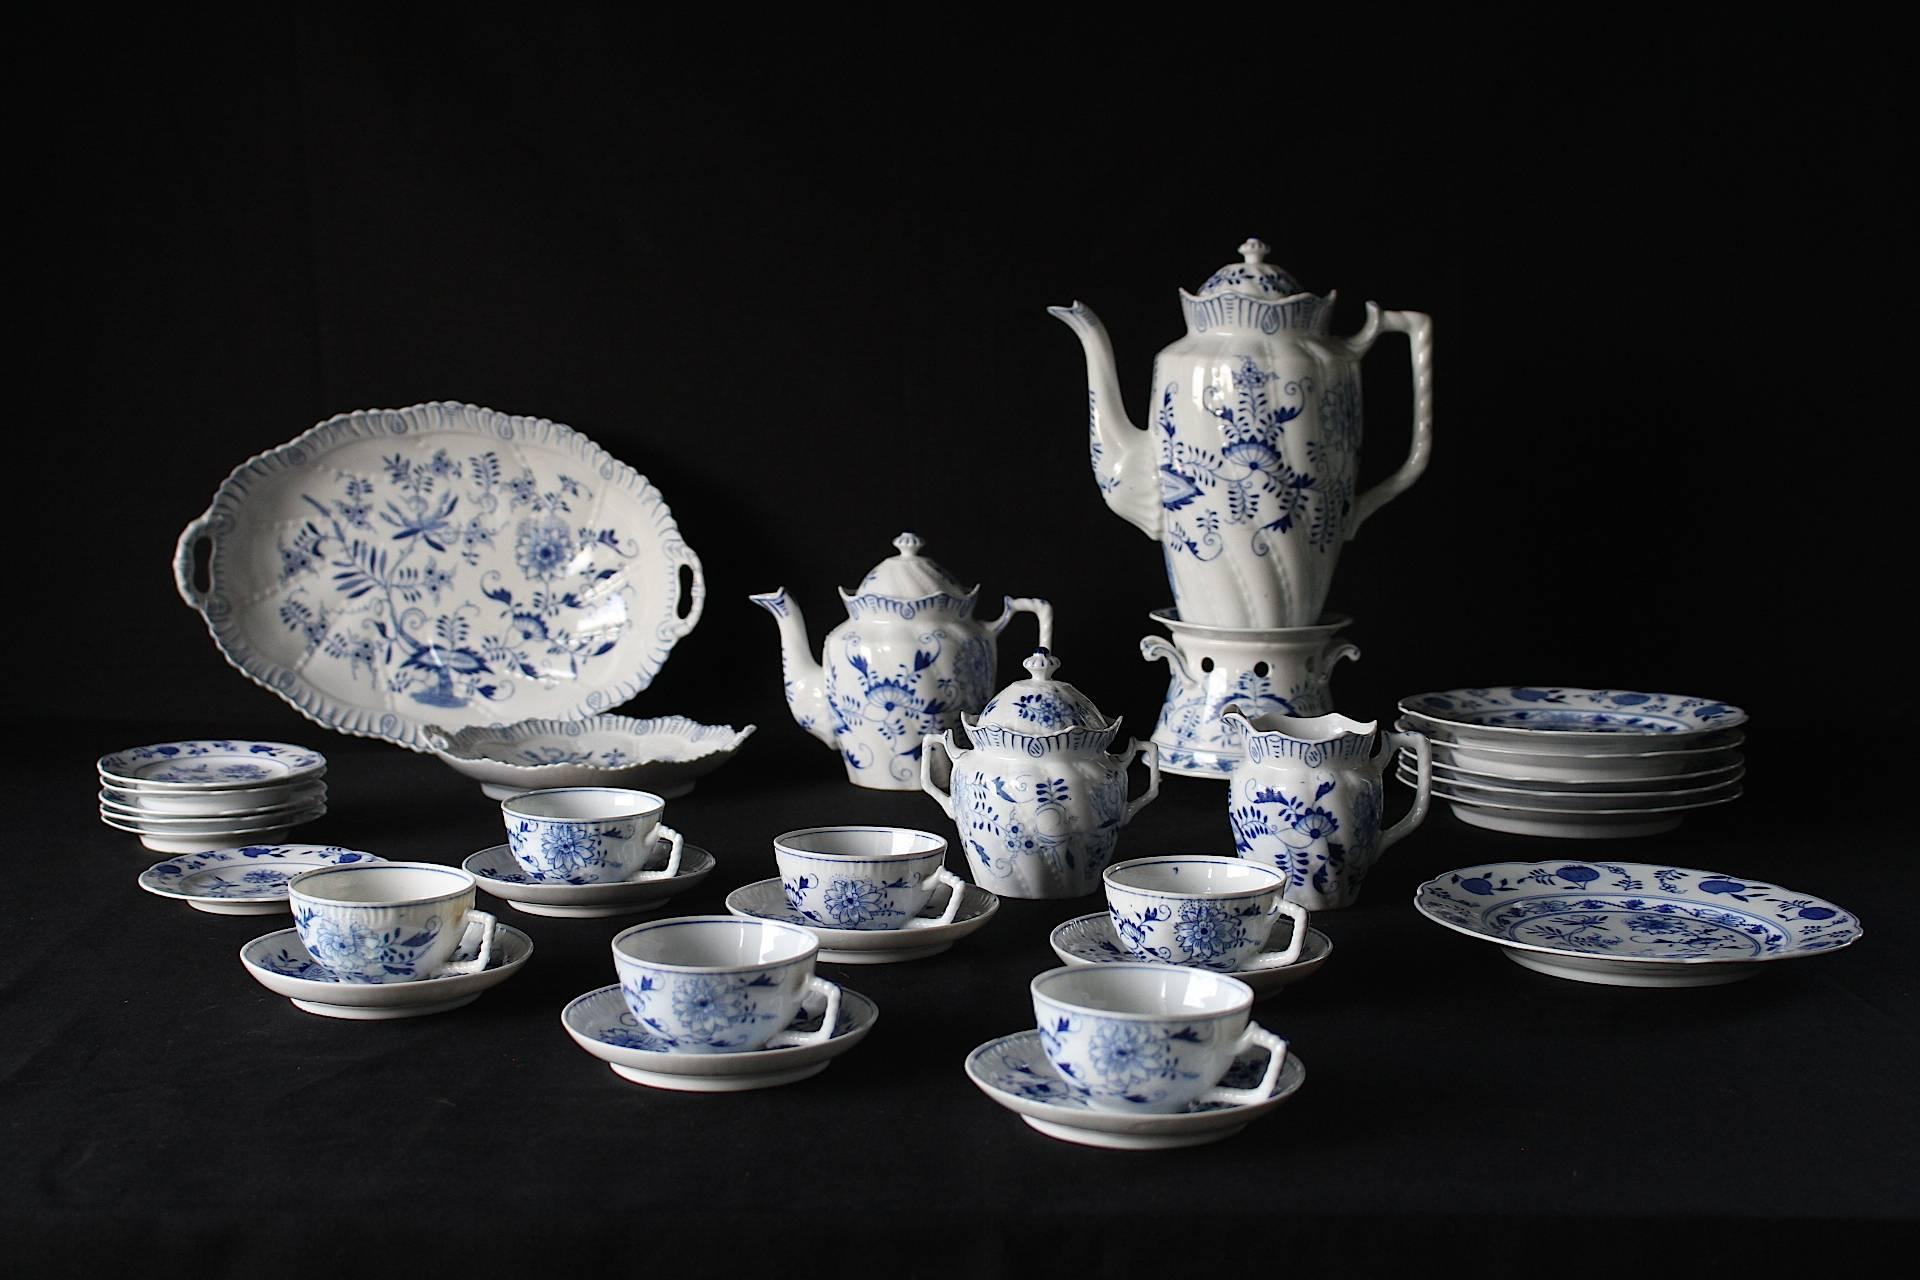 Here a very rare and large coffee and tea service by Louis Regout Maastricht, circa 1890.
Louis was the son of Petrus Regout who founded the Sphinx Ceramics in 1835.
It was the first porcelain and ceramics pottery in Maastricht.
Hubert Gérard